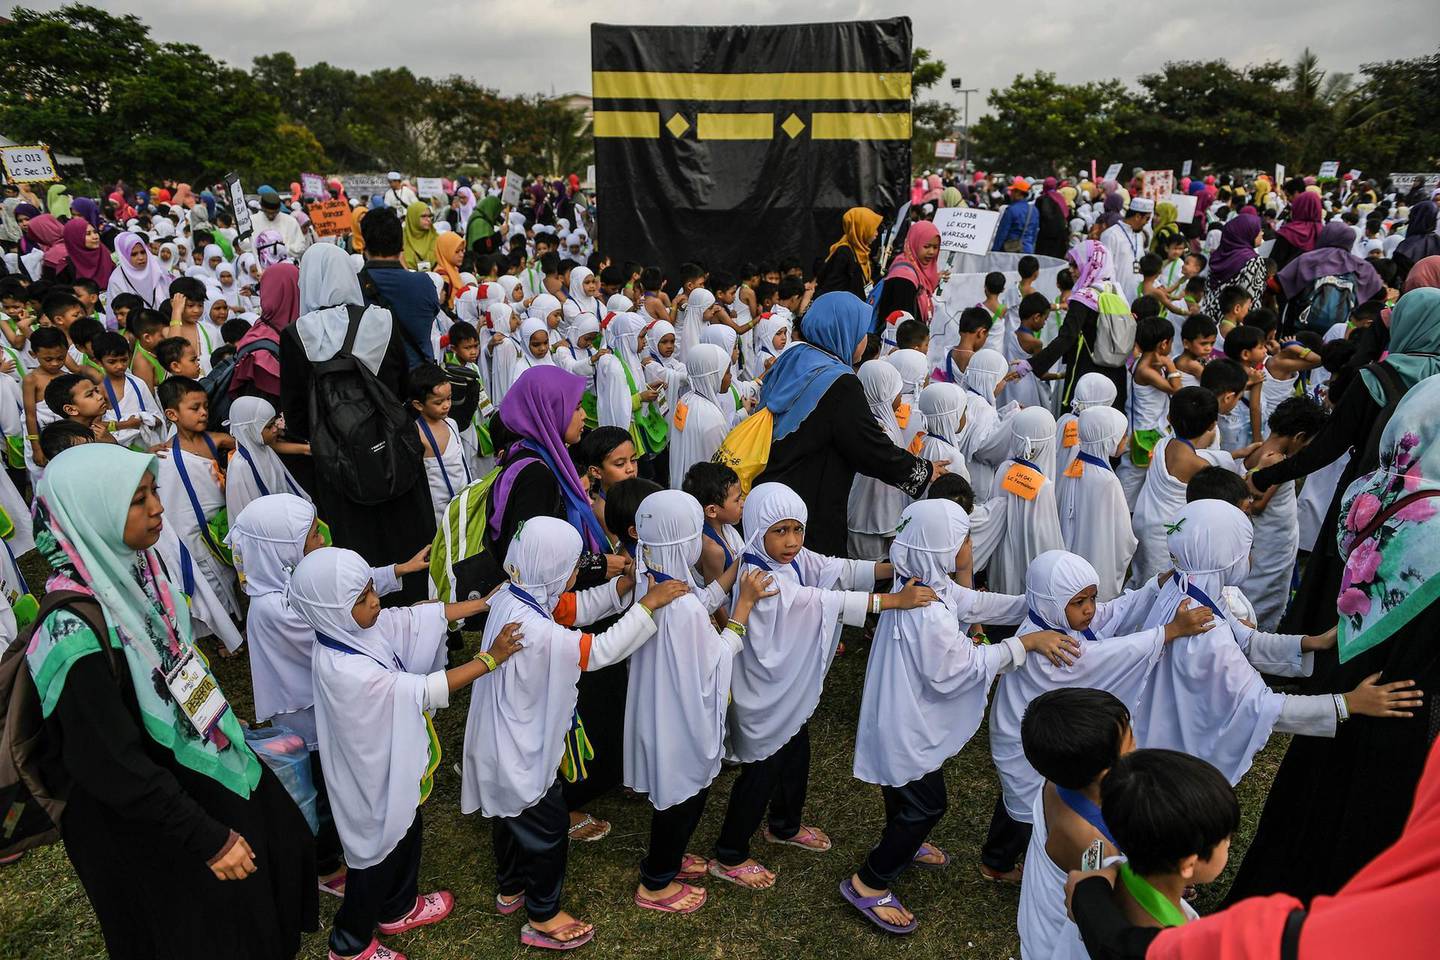 Malaysian children from the Little Caliphs kindergarten circumambulate a mockup of the Kaaba, Islam's most sacred structure located in the holy city of Mecca, during an educational simulation of the Hajj pilgrimage in Shah Alam, outside Kuala Lumpur on July 24, 2017.    
Thousands of Malaysian children took part in a practice run for the Muslim hajj pilgrimage on July 24, walking round a model of the holy Kaaba shrine under the tropical sun. The hajj is one of the five pillars of Islam, which capable Muslims must perform at least once, and marks the spiritual peak of their lives. / AFP PHOTO / MOHD RASFAN